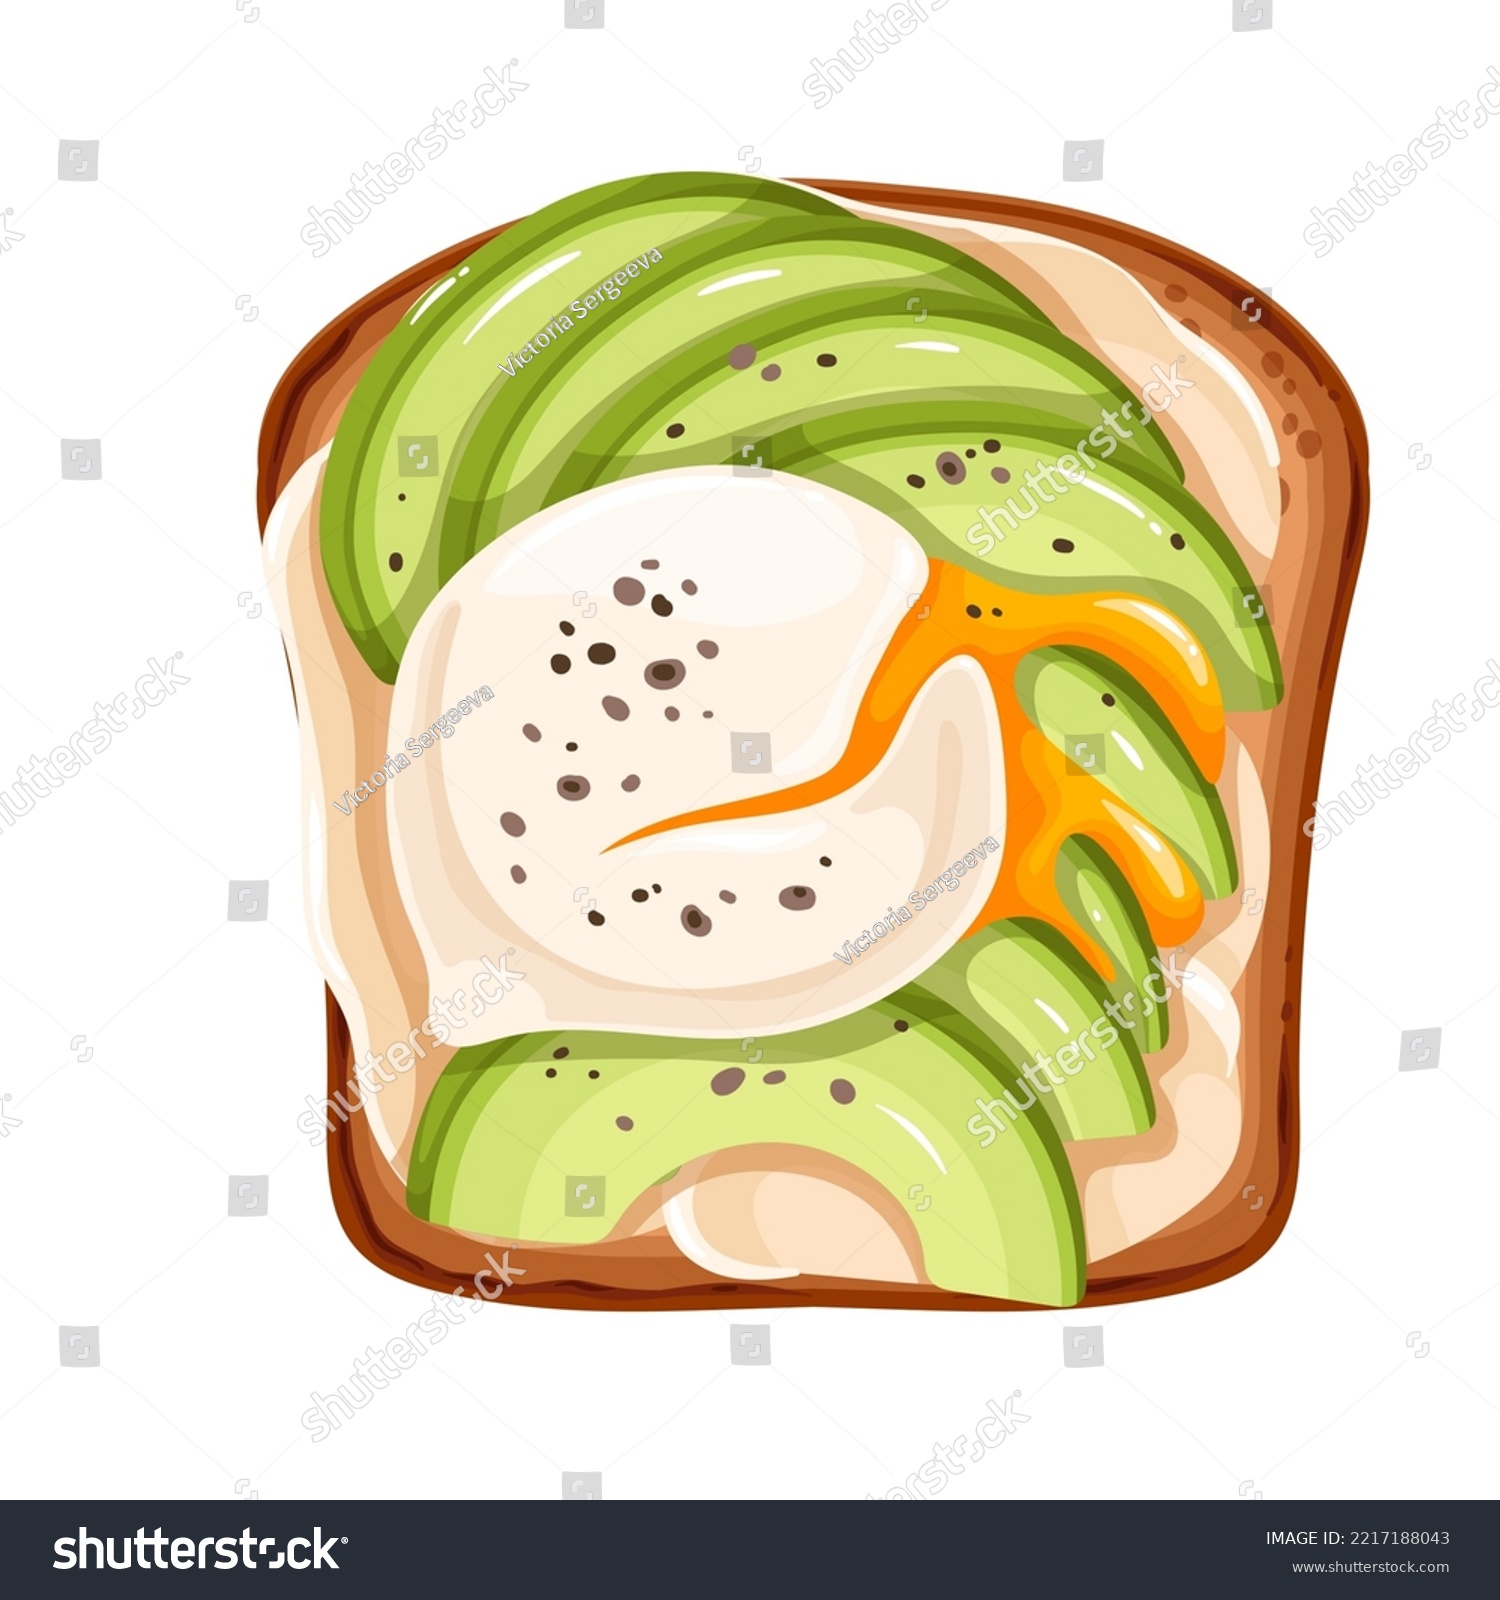 SVG of Toast with egg and avocado vector illustration. Cartoon isolated toasted whole wheat or rye bread with slices of avocado, poached egg and soft cheese, top view of sandwich for balanced breakfast svg